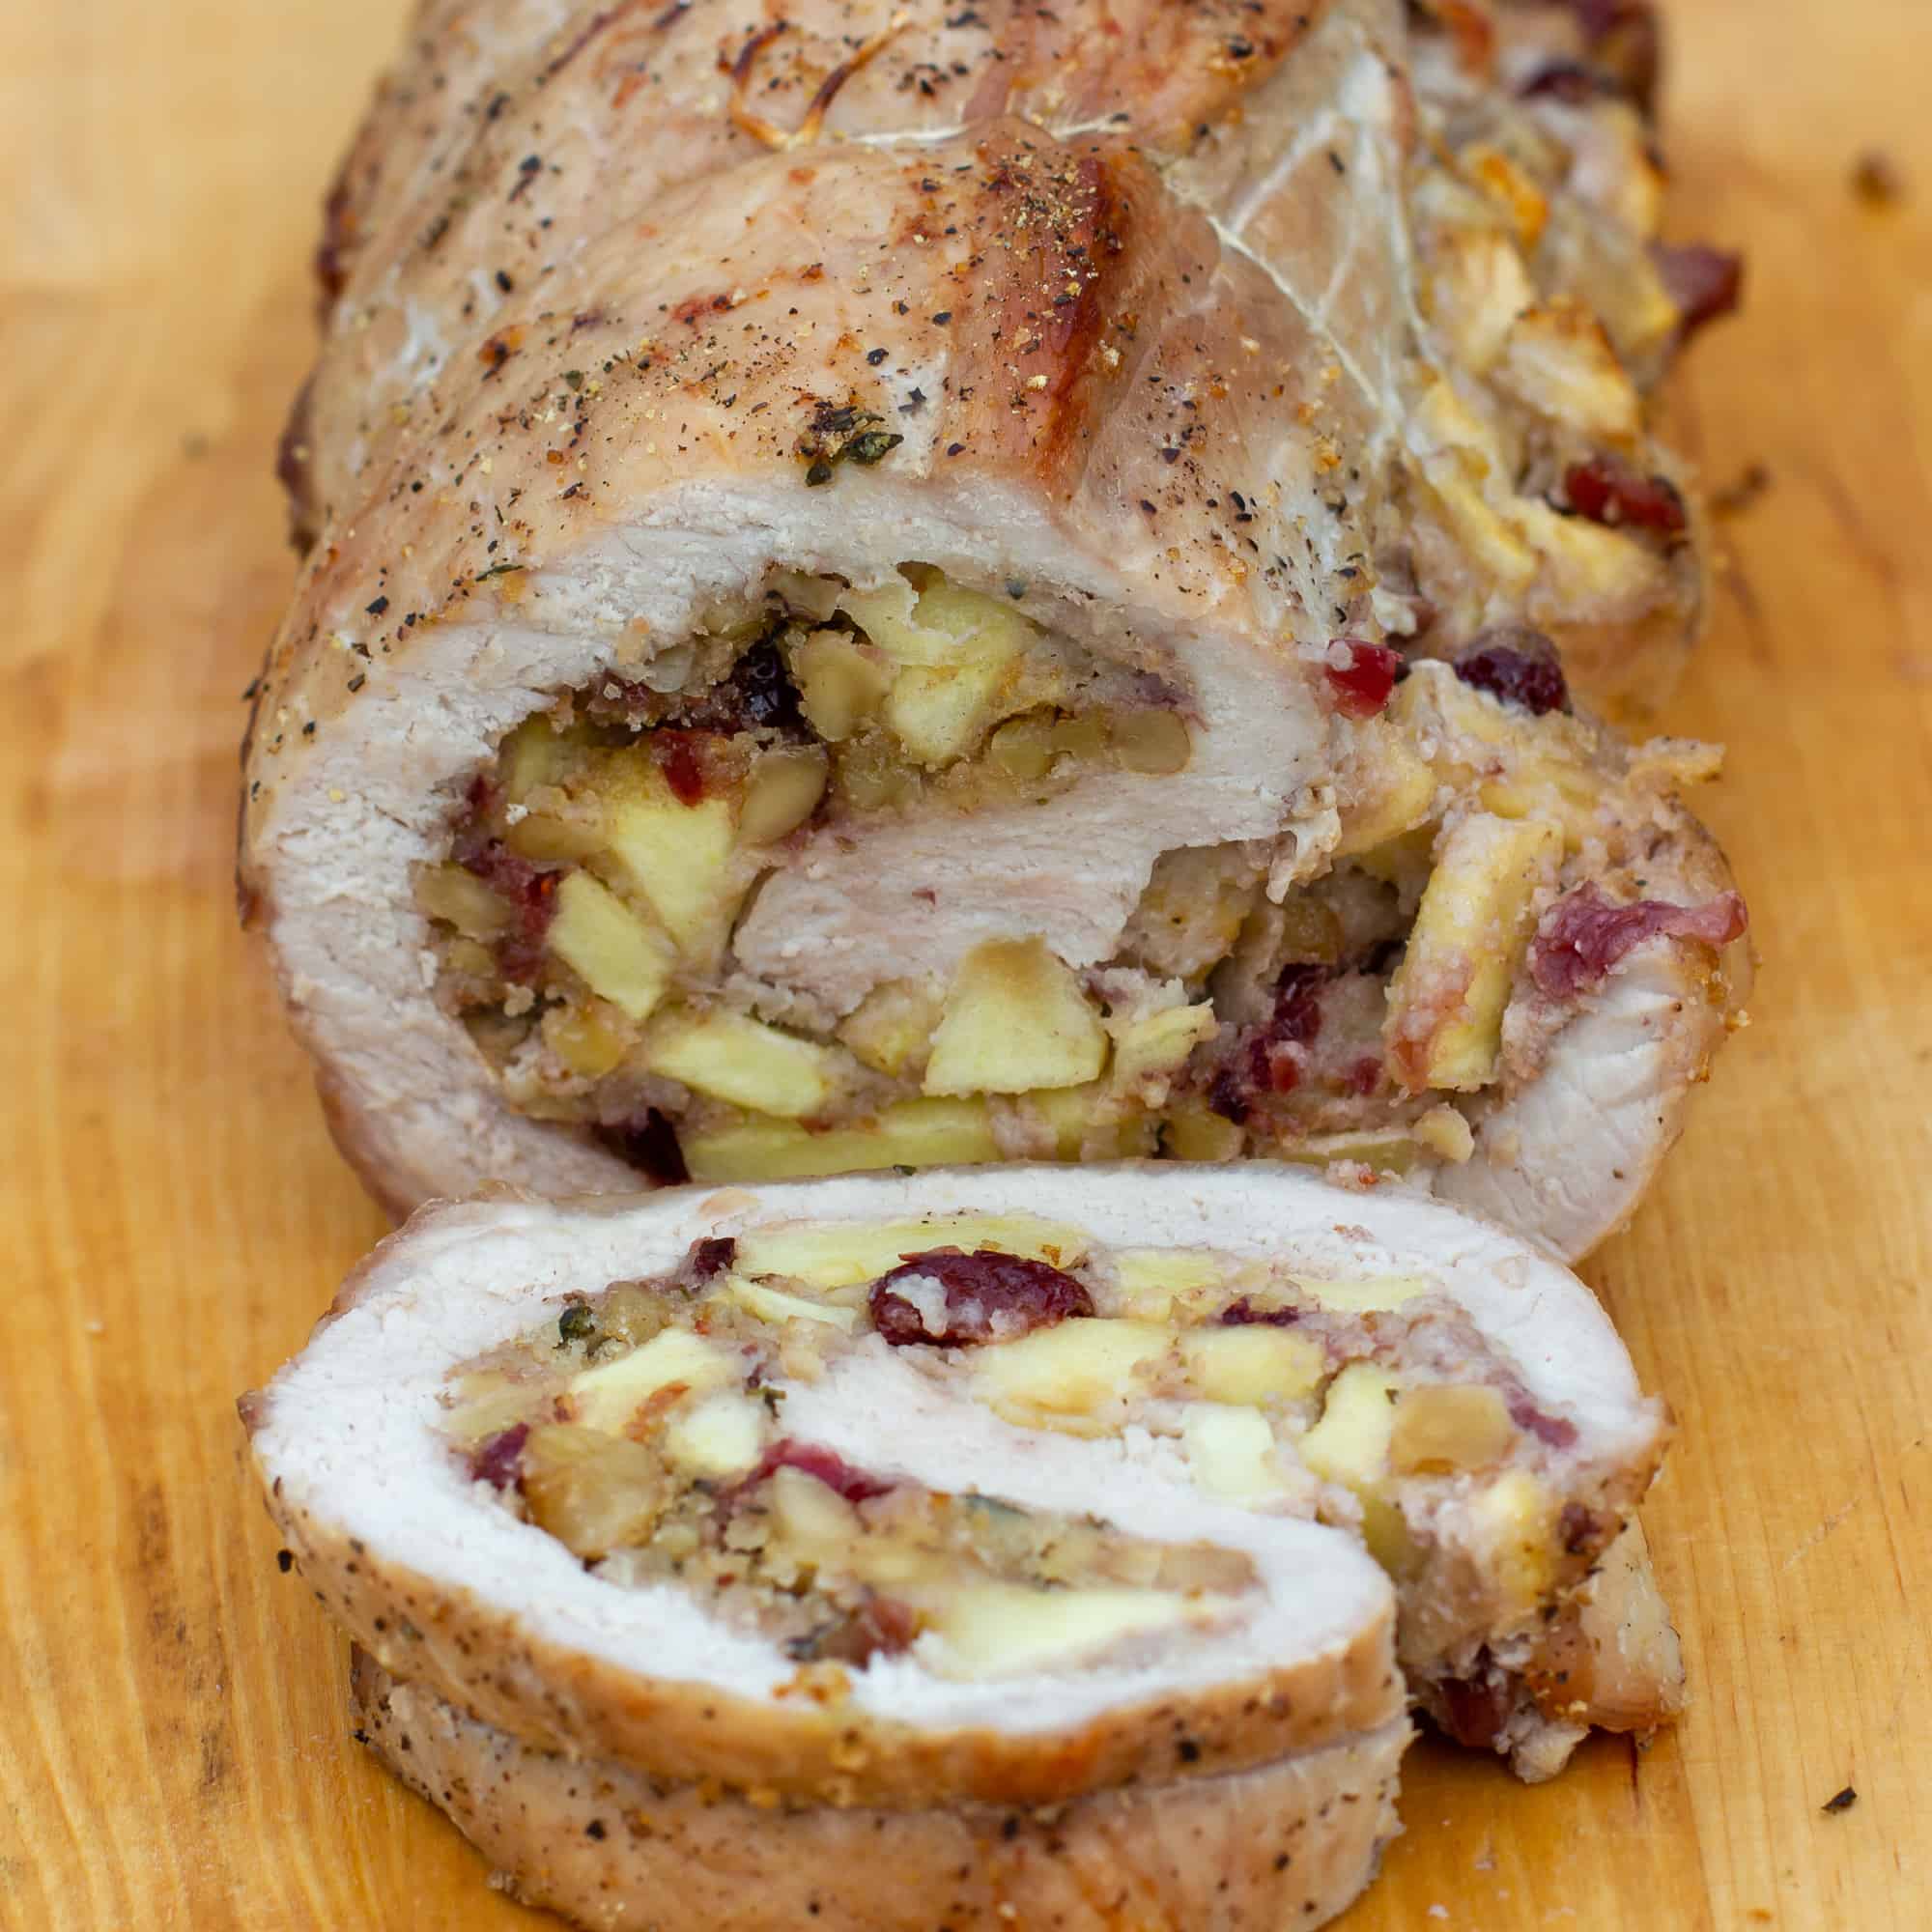 A butterflied boneless pork loin stuffed with apples, cranberries, walnuts and fresh thyme. How to instructions to butterfly a pork loin.